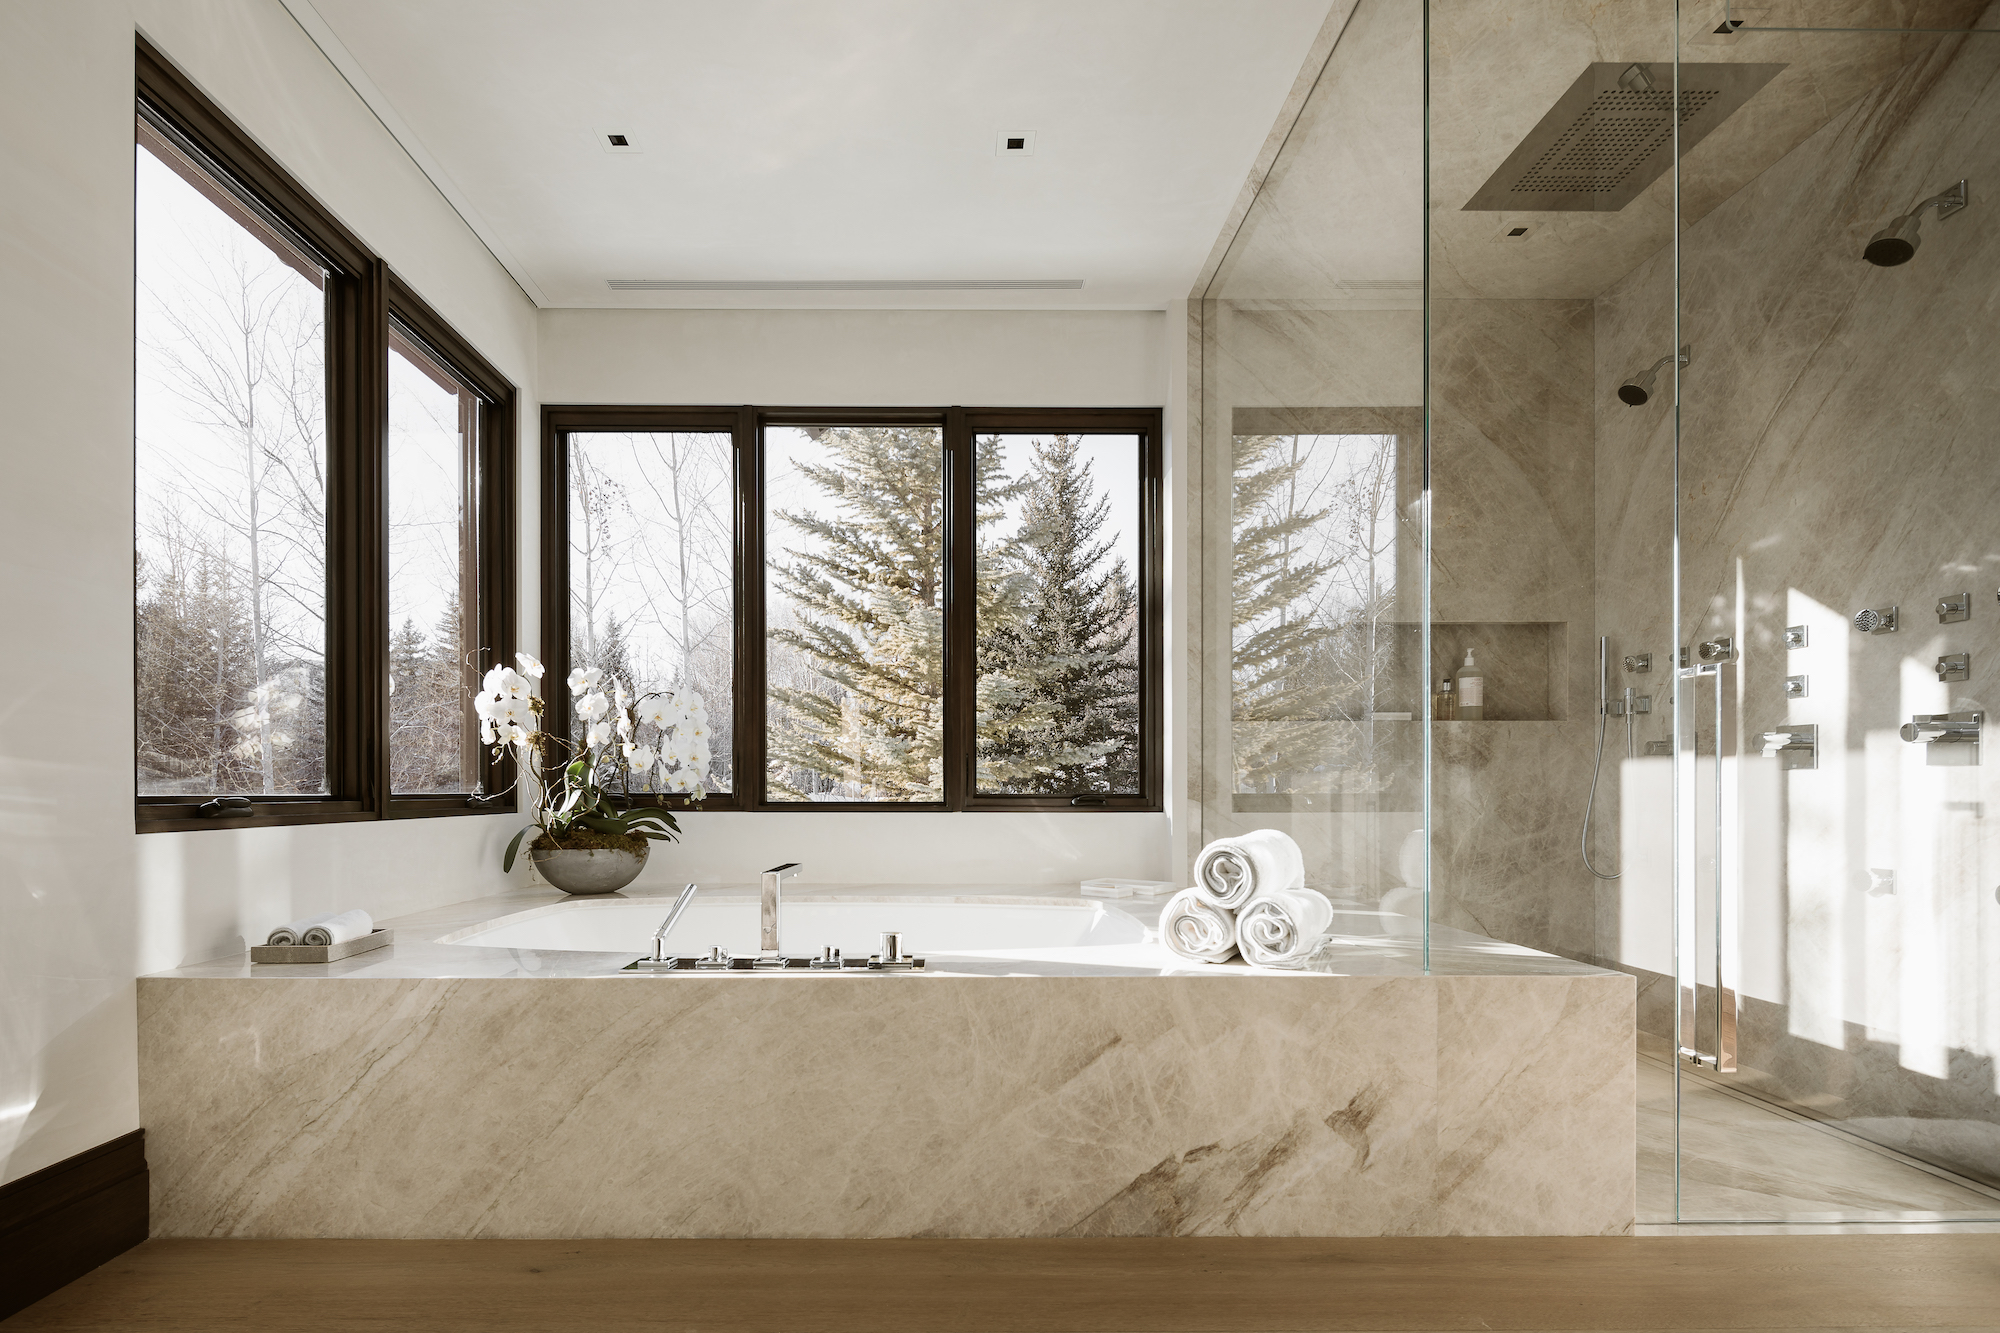 The experience shower is increasingly being seen in high-end residential projects, such as the above spathroom by Pembrooke & Ives - Effect Magazine